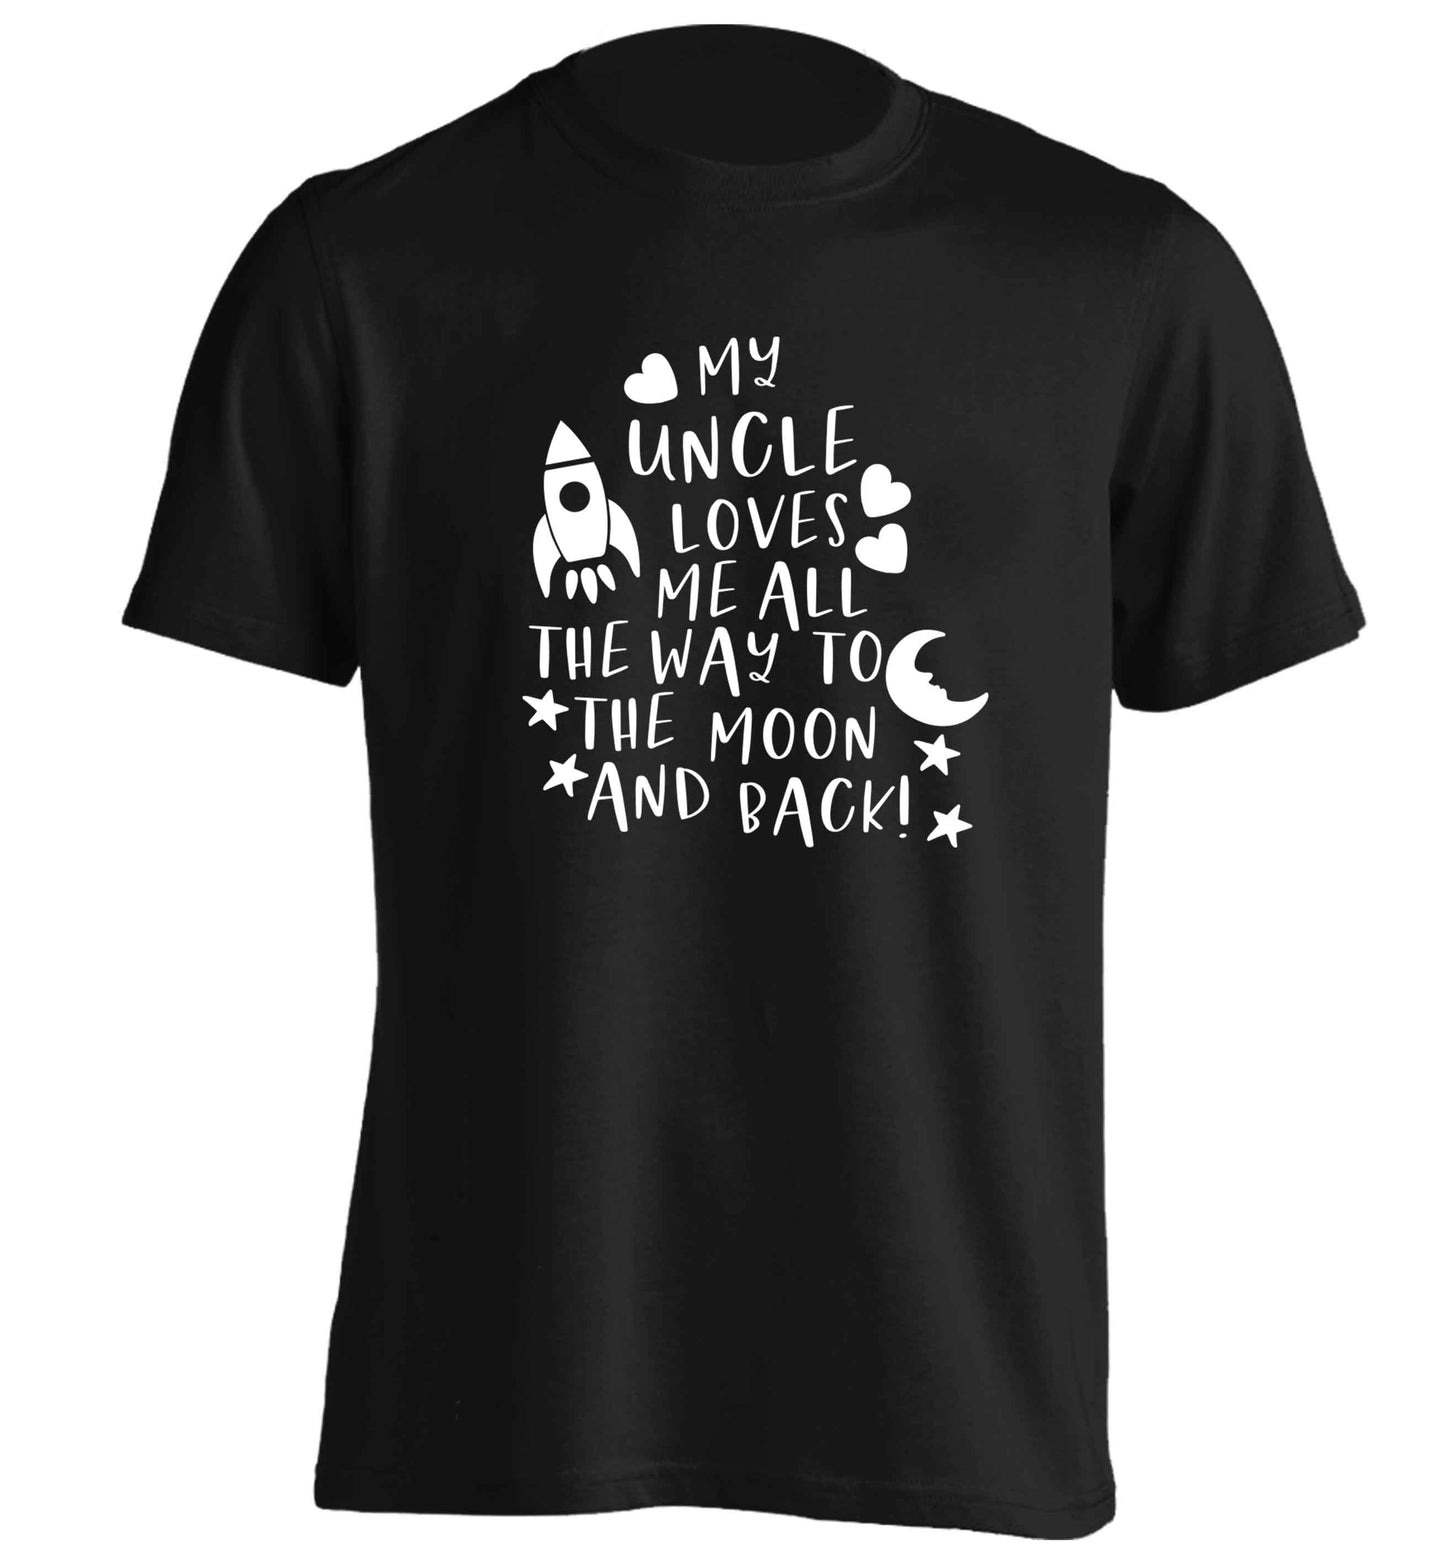 My uncle loves me all the way to the moon and back adults unisex black Tshirt 2XL